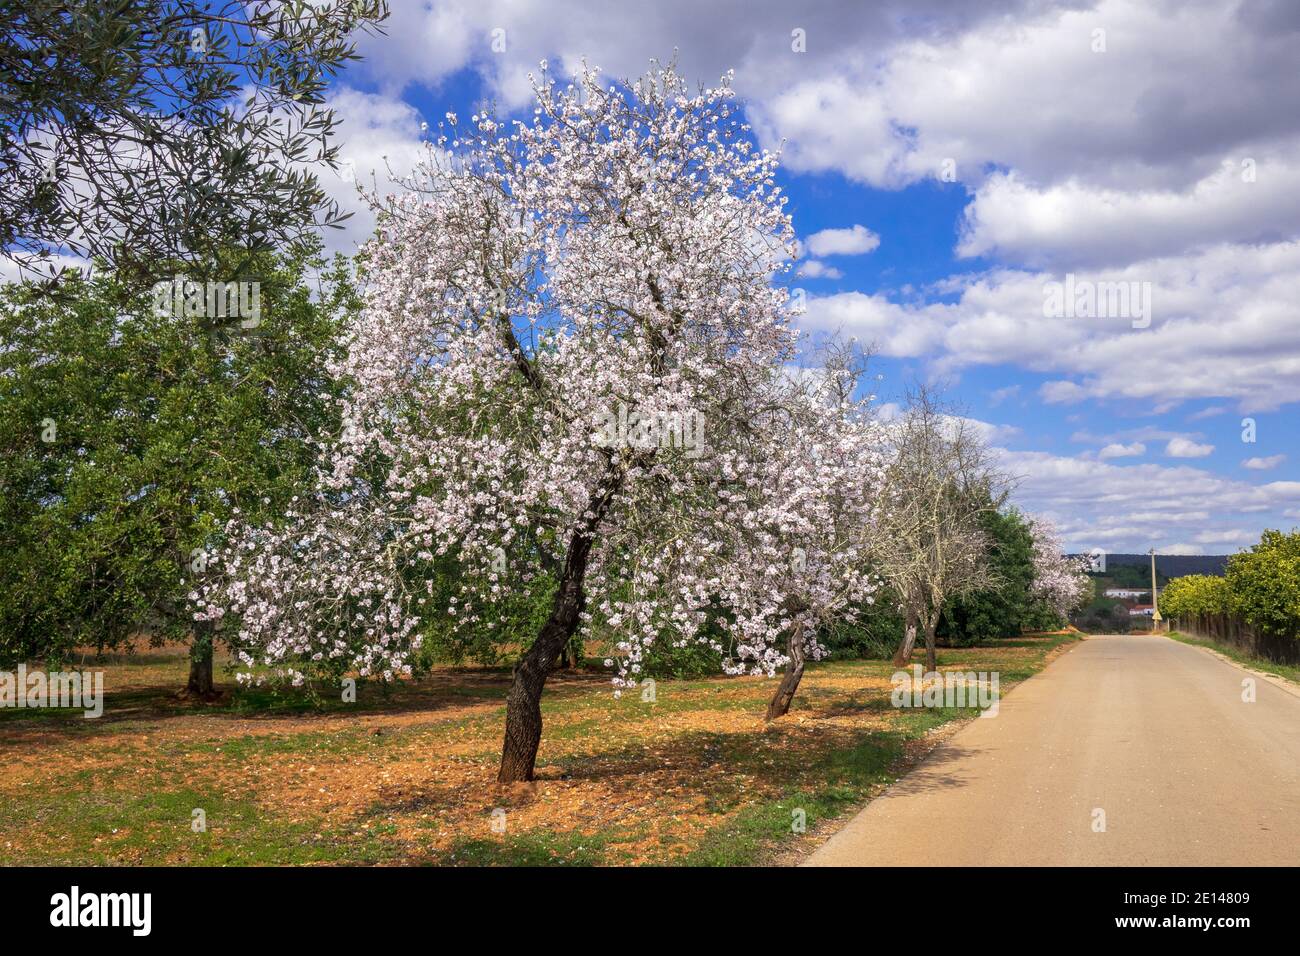 Almond Trees (Prunus dulcis), Blossom In The Algarve Portugal Just North Inland From Albufeira February Is Almond Blossom Time In Portugal Stock Photo